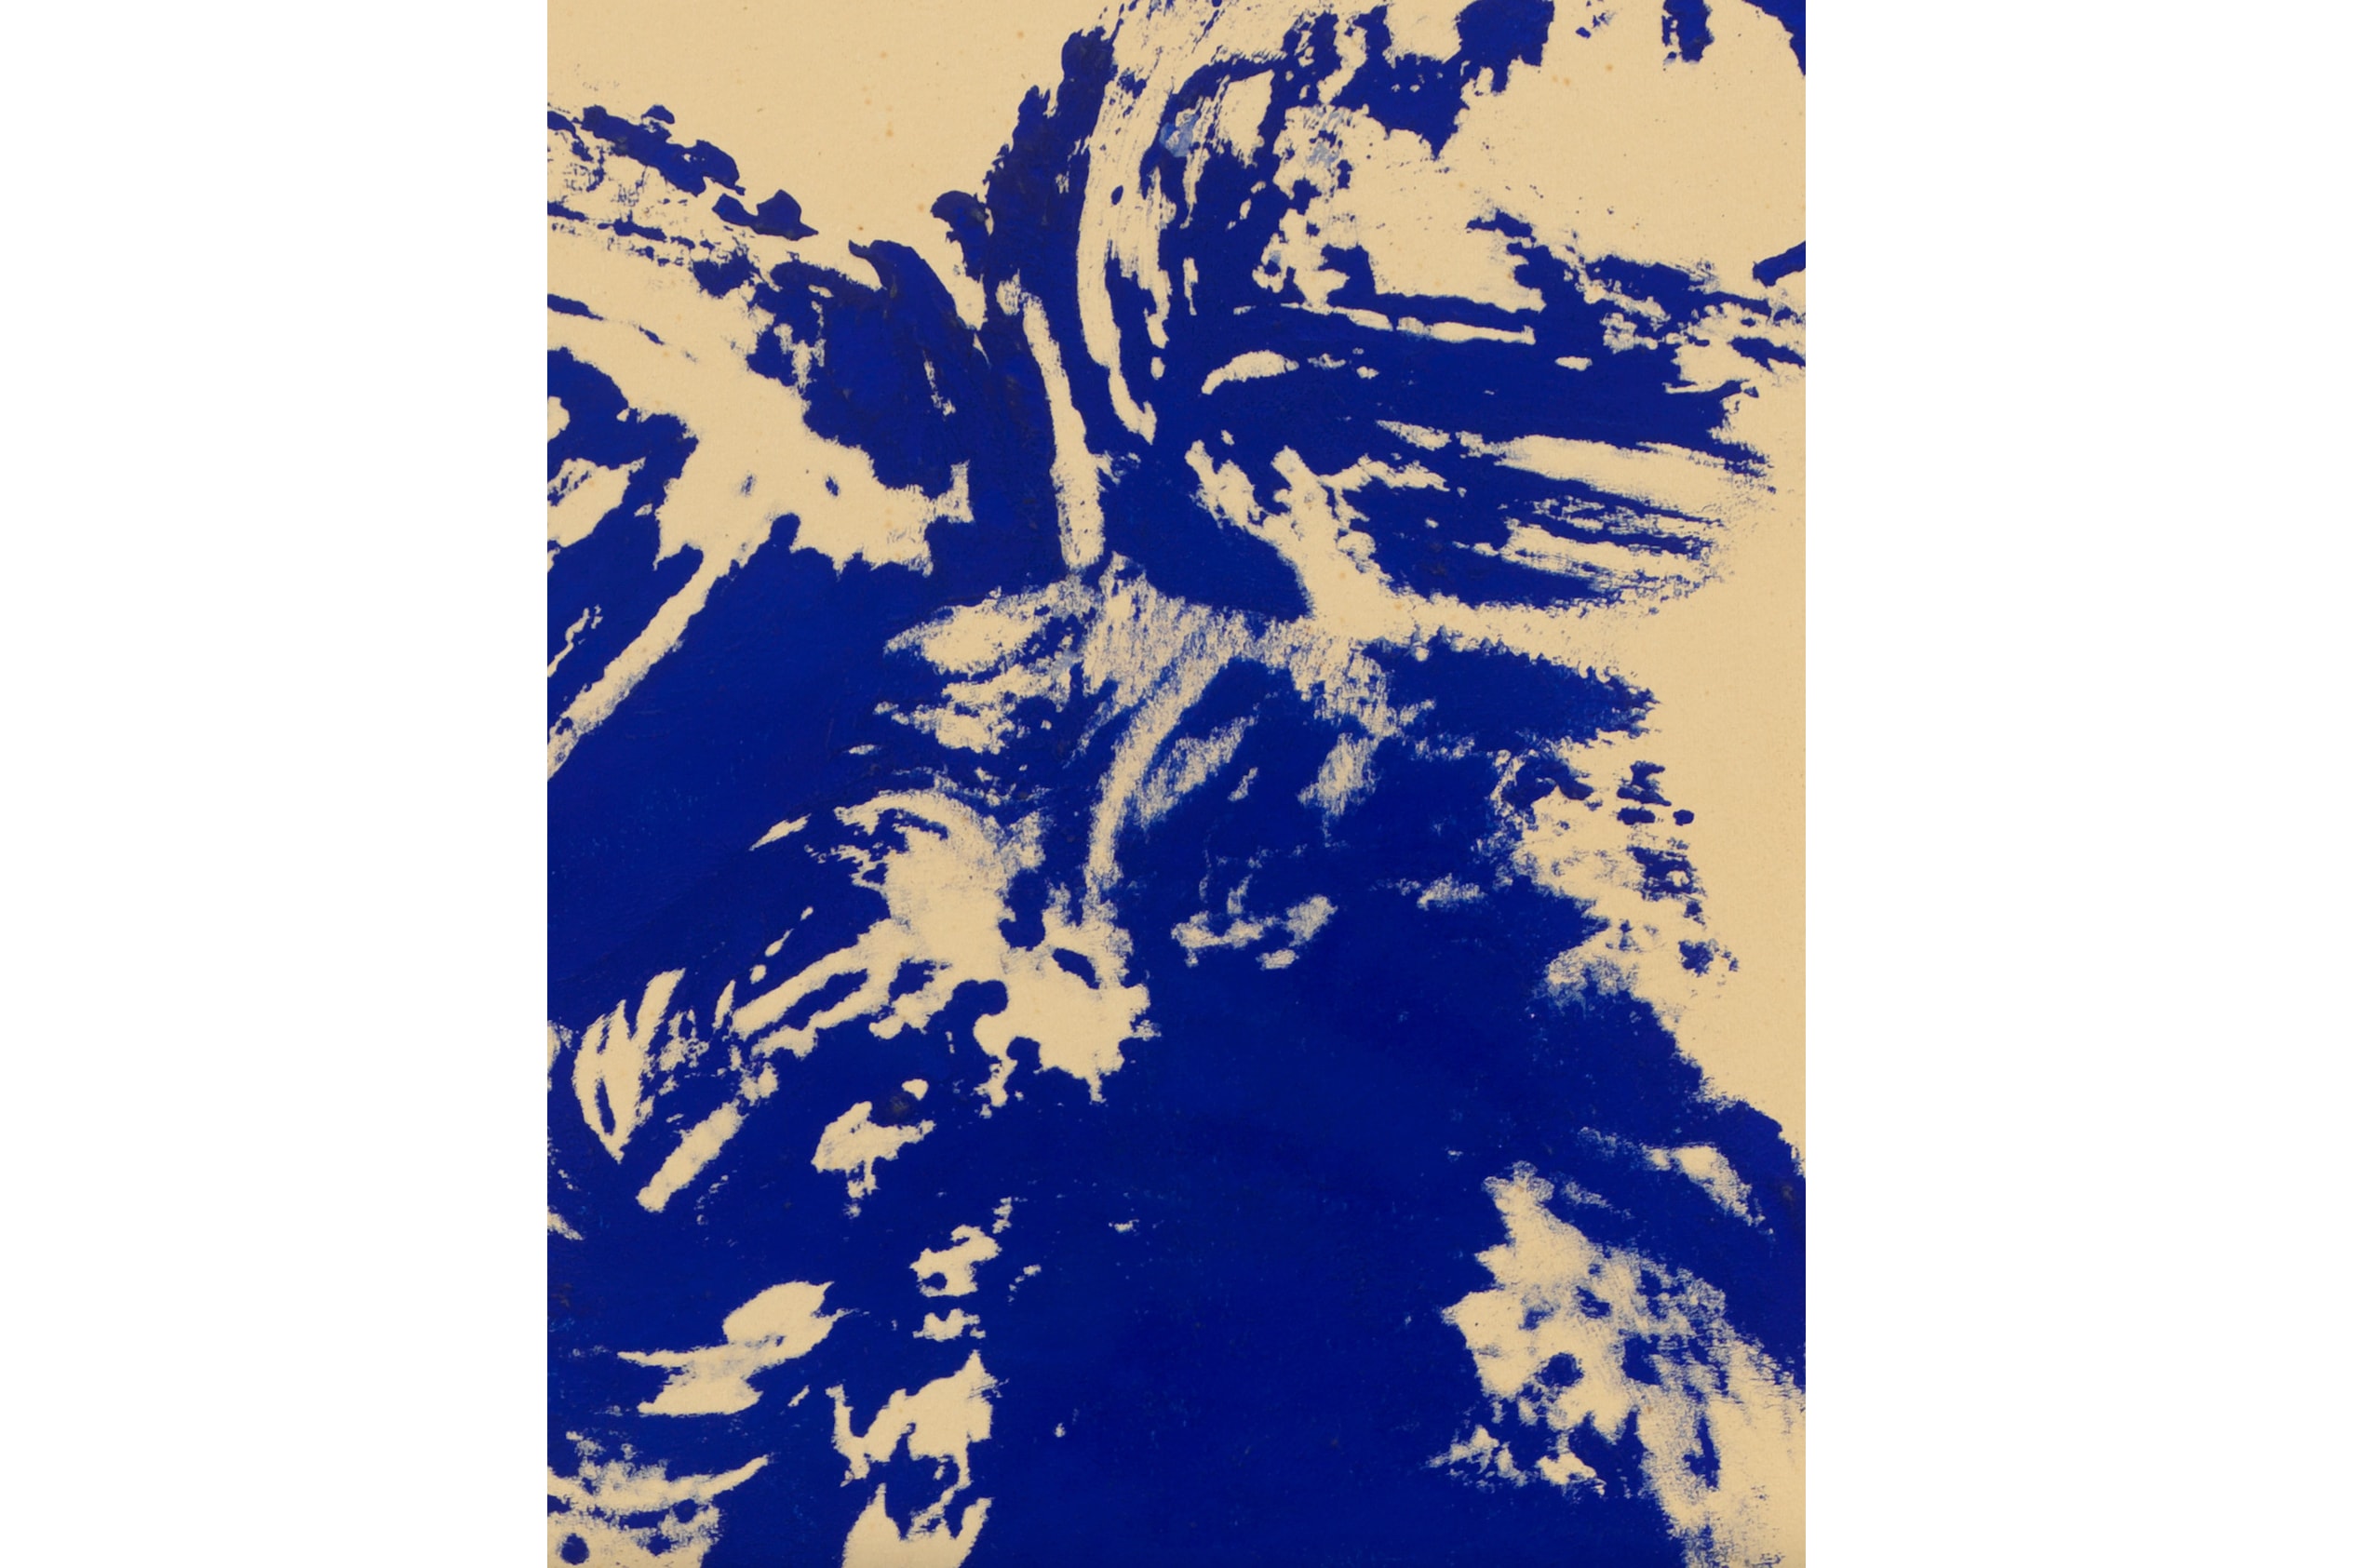 yves klein levy gorvy exhibition artwork paintings contemporary art